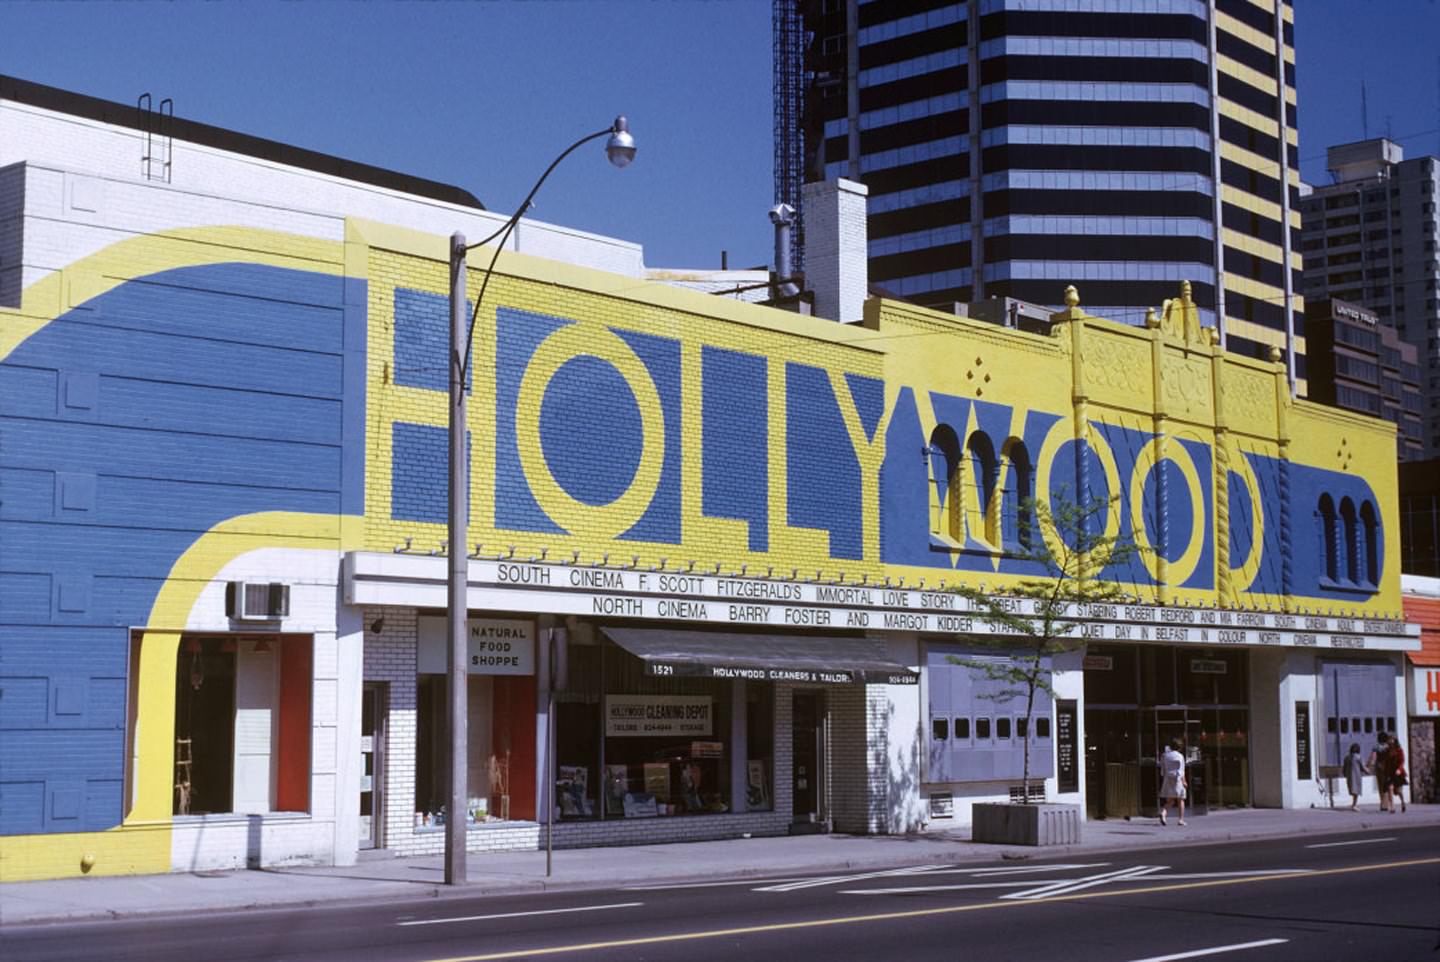 Hollywood Theatre on Yonge Street just south of Heath Street, June 2, 1974.